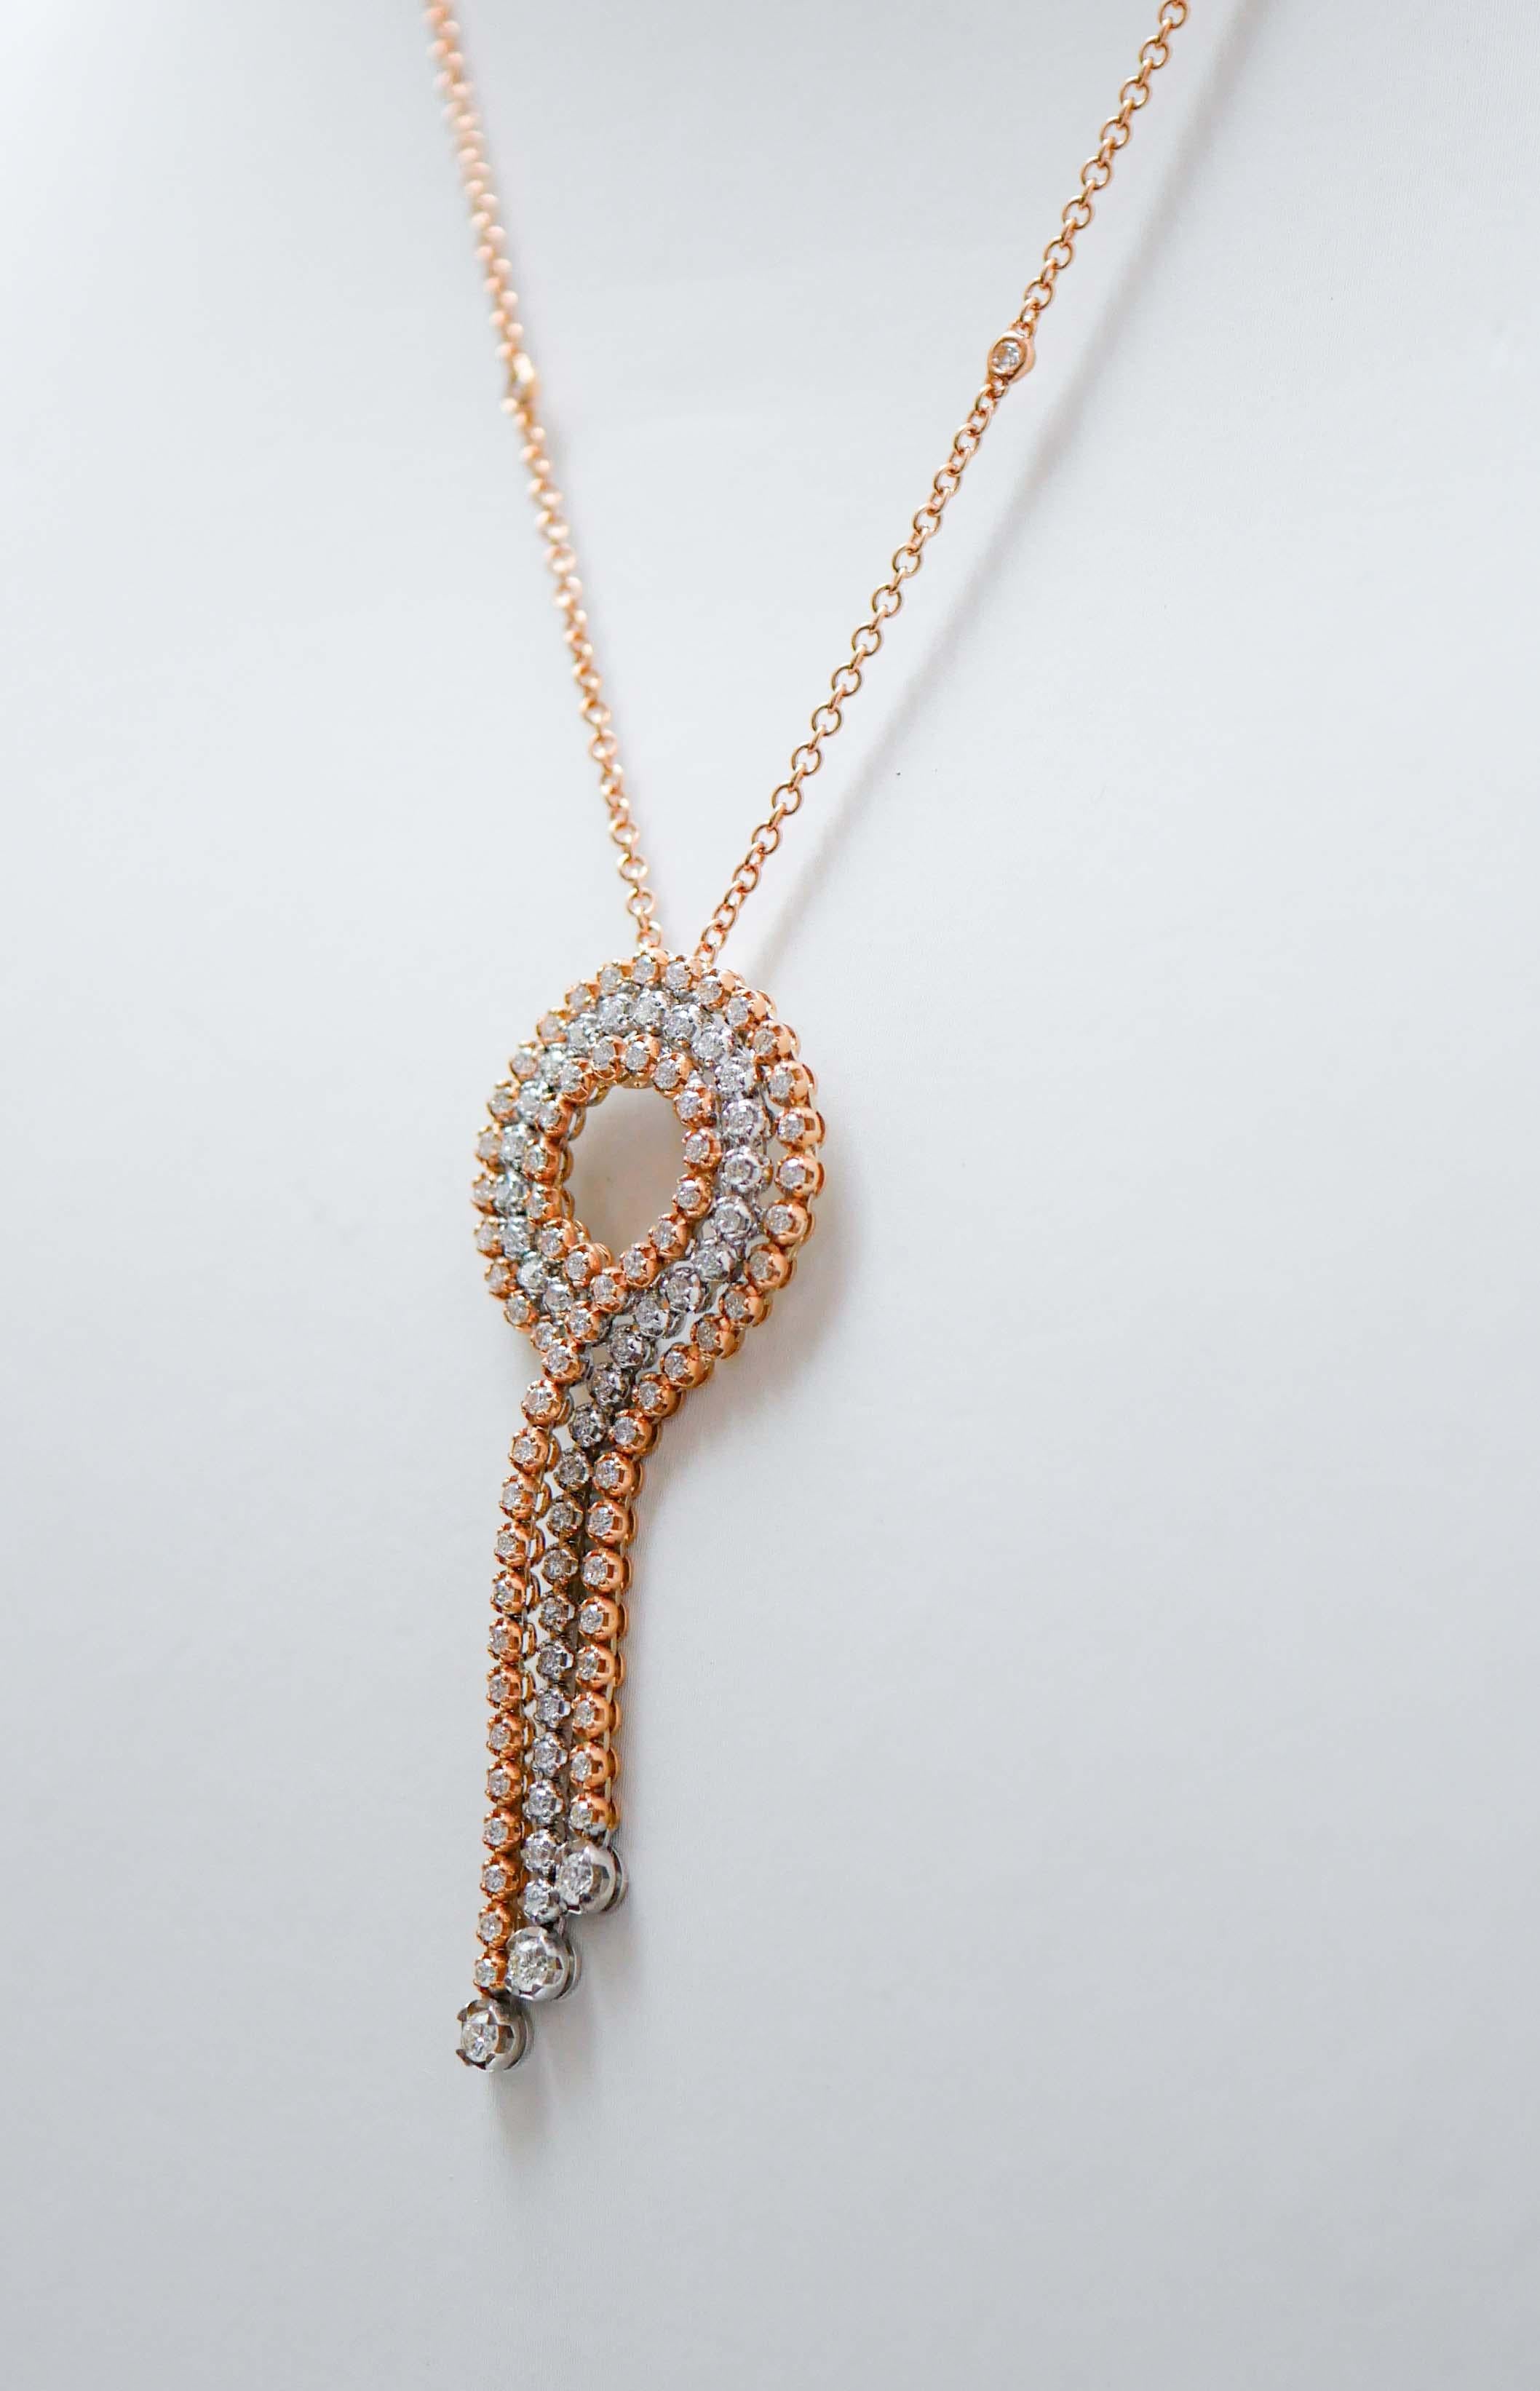 Modern Diamonds, 18 Karat Rose Gold and White Gold Pendant Necklace. For Sale